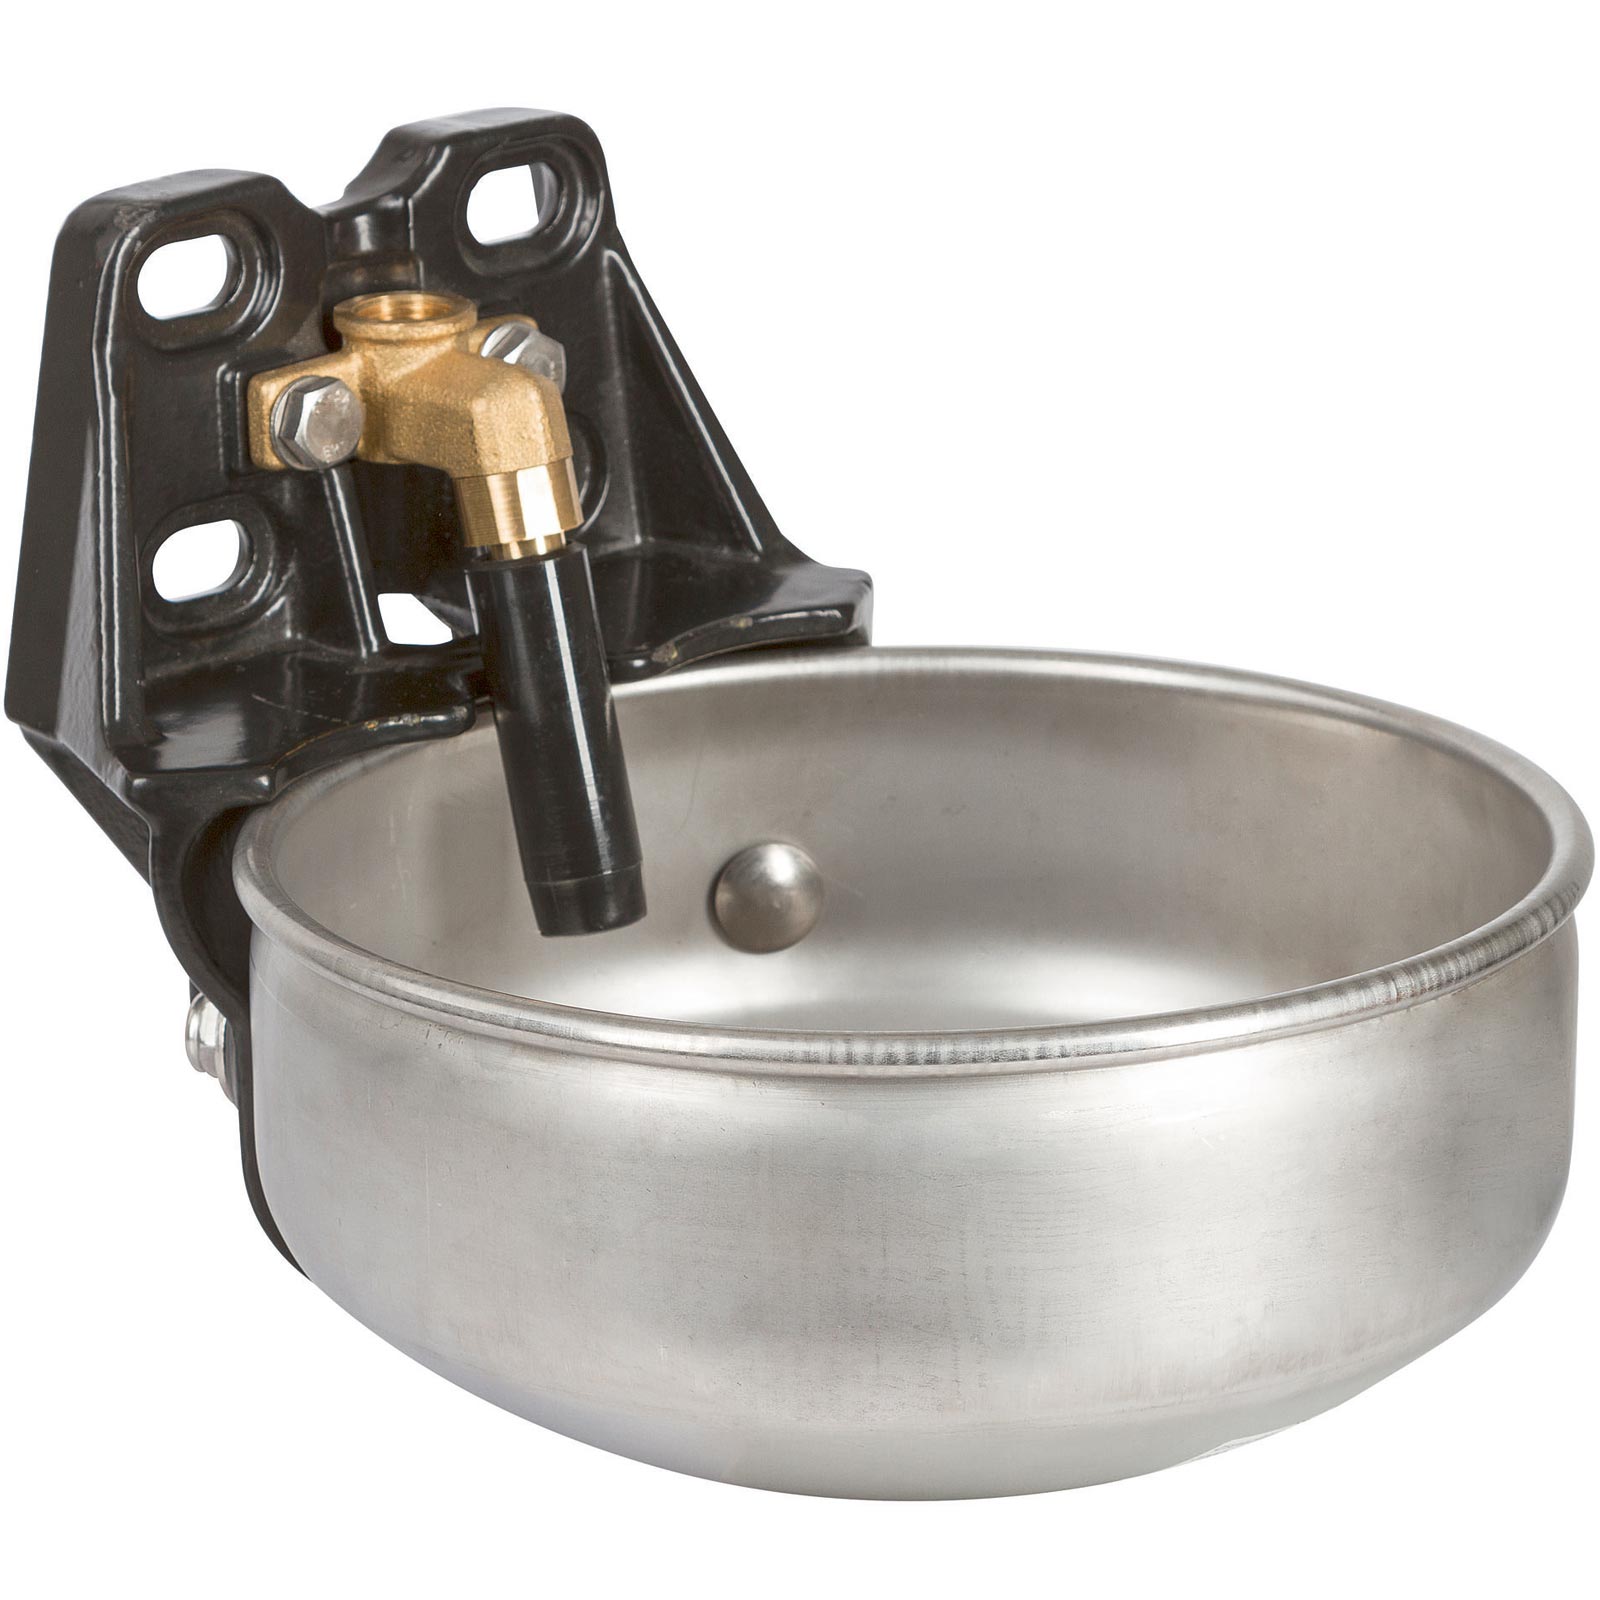 Water bowl stainless steel E21 with tube valve